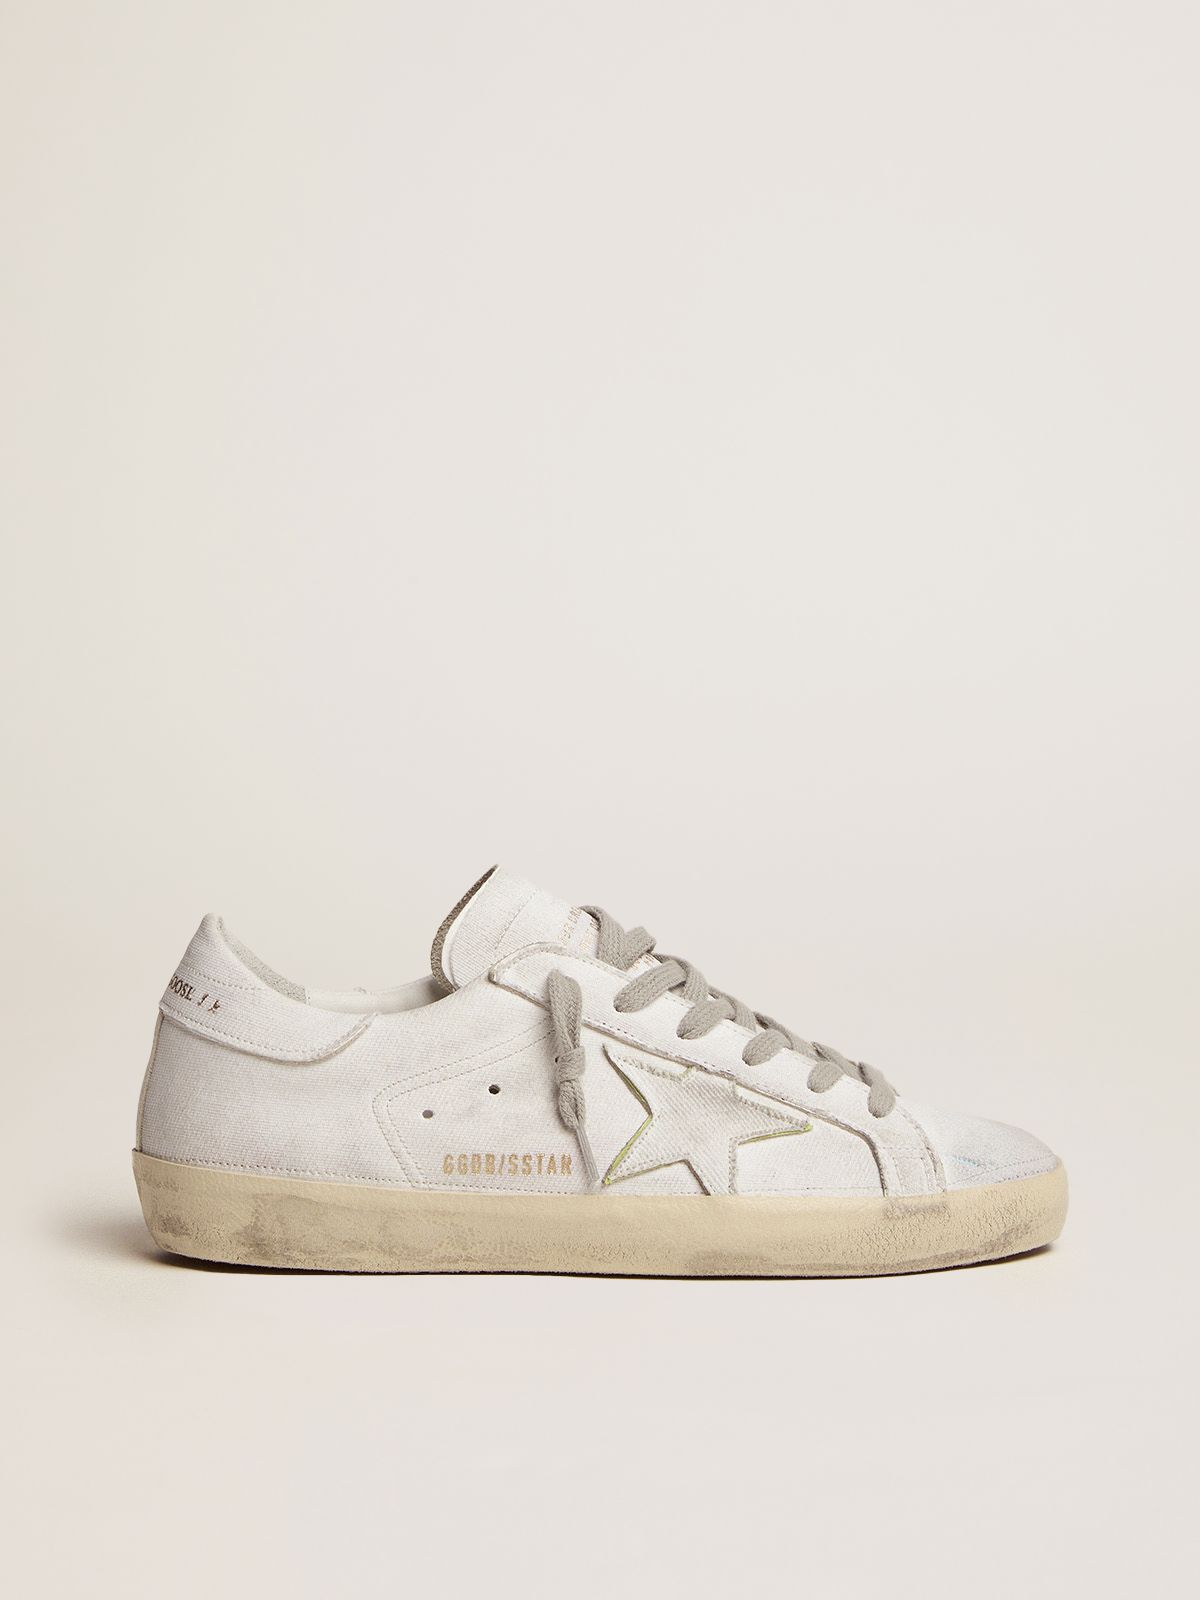 Super-Star Dream Maker sneakers in white color with reverse construction and hidden multicolor details